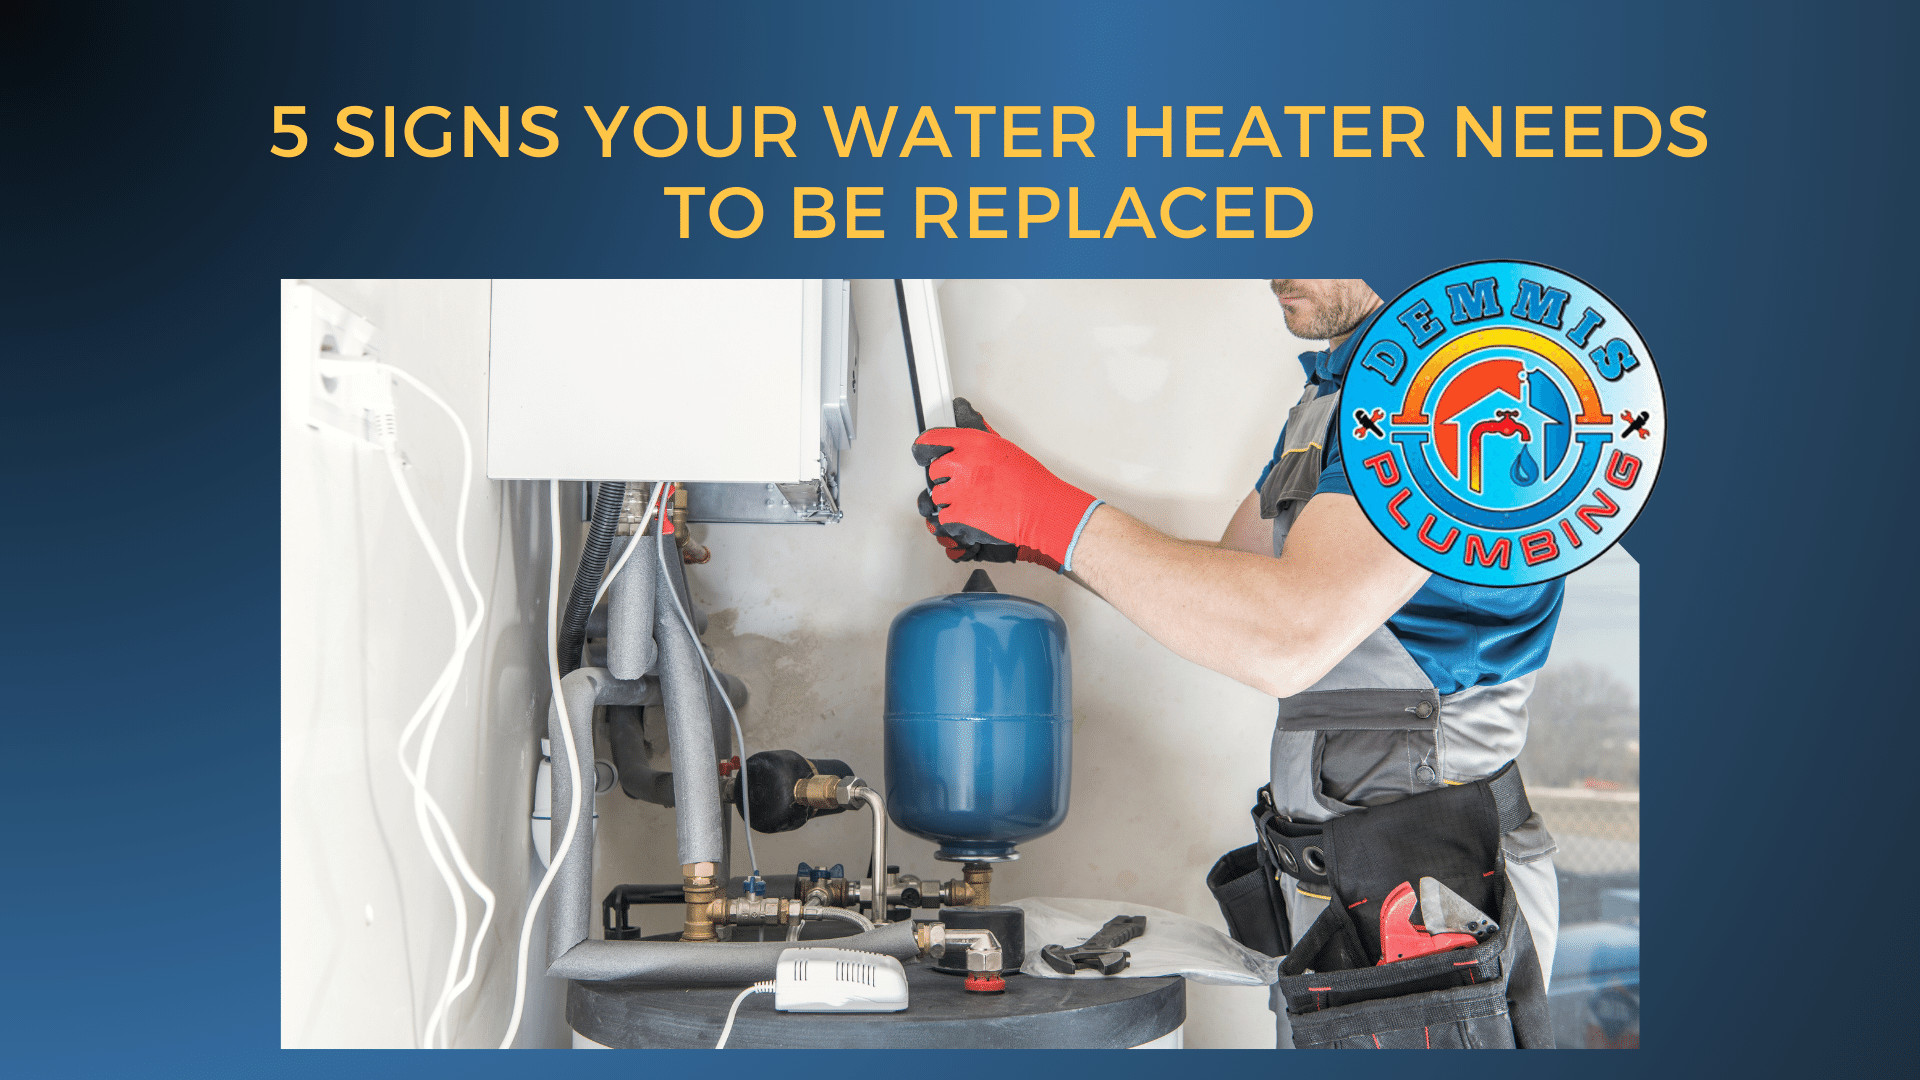 5 Signs Your Water Heater Needs to be Replaced